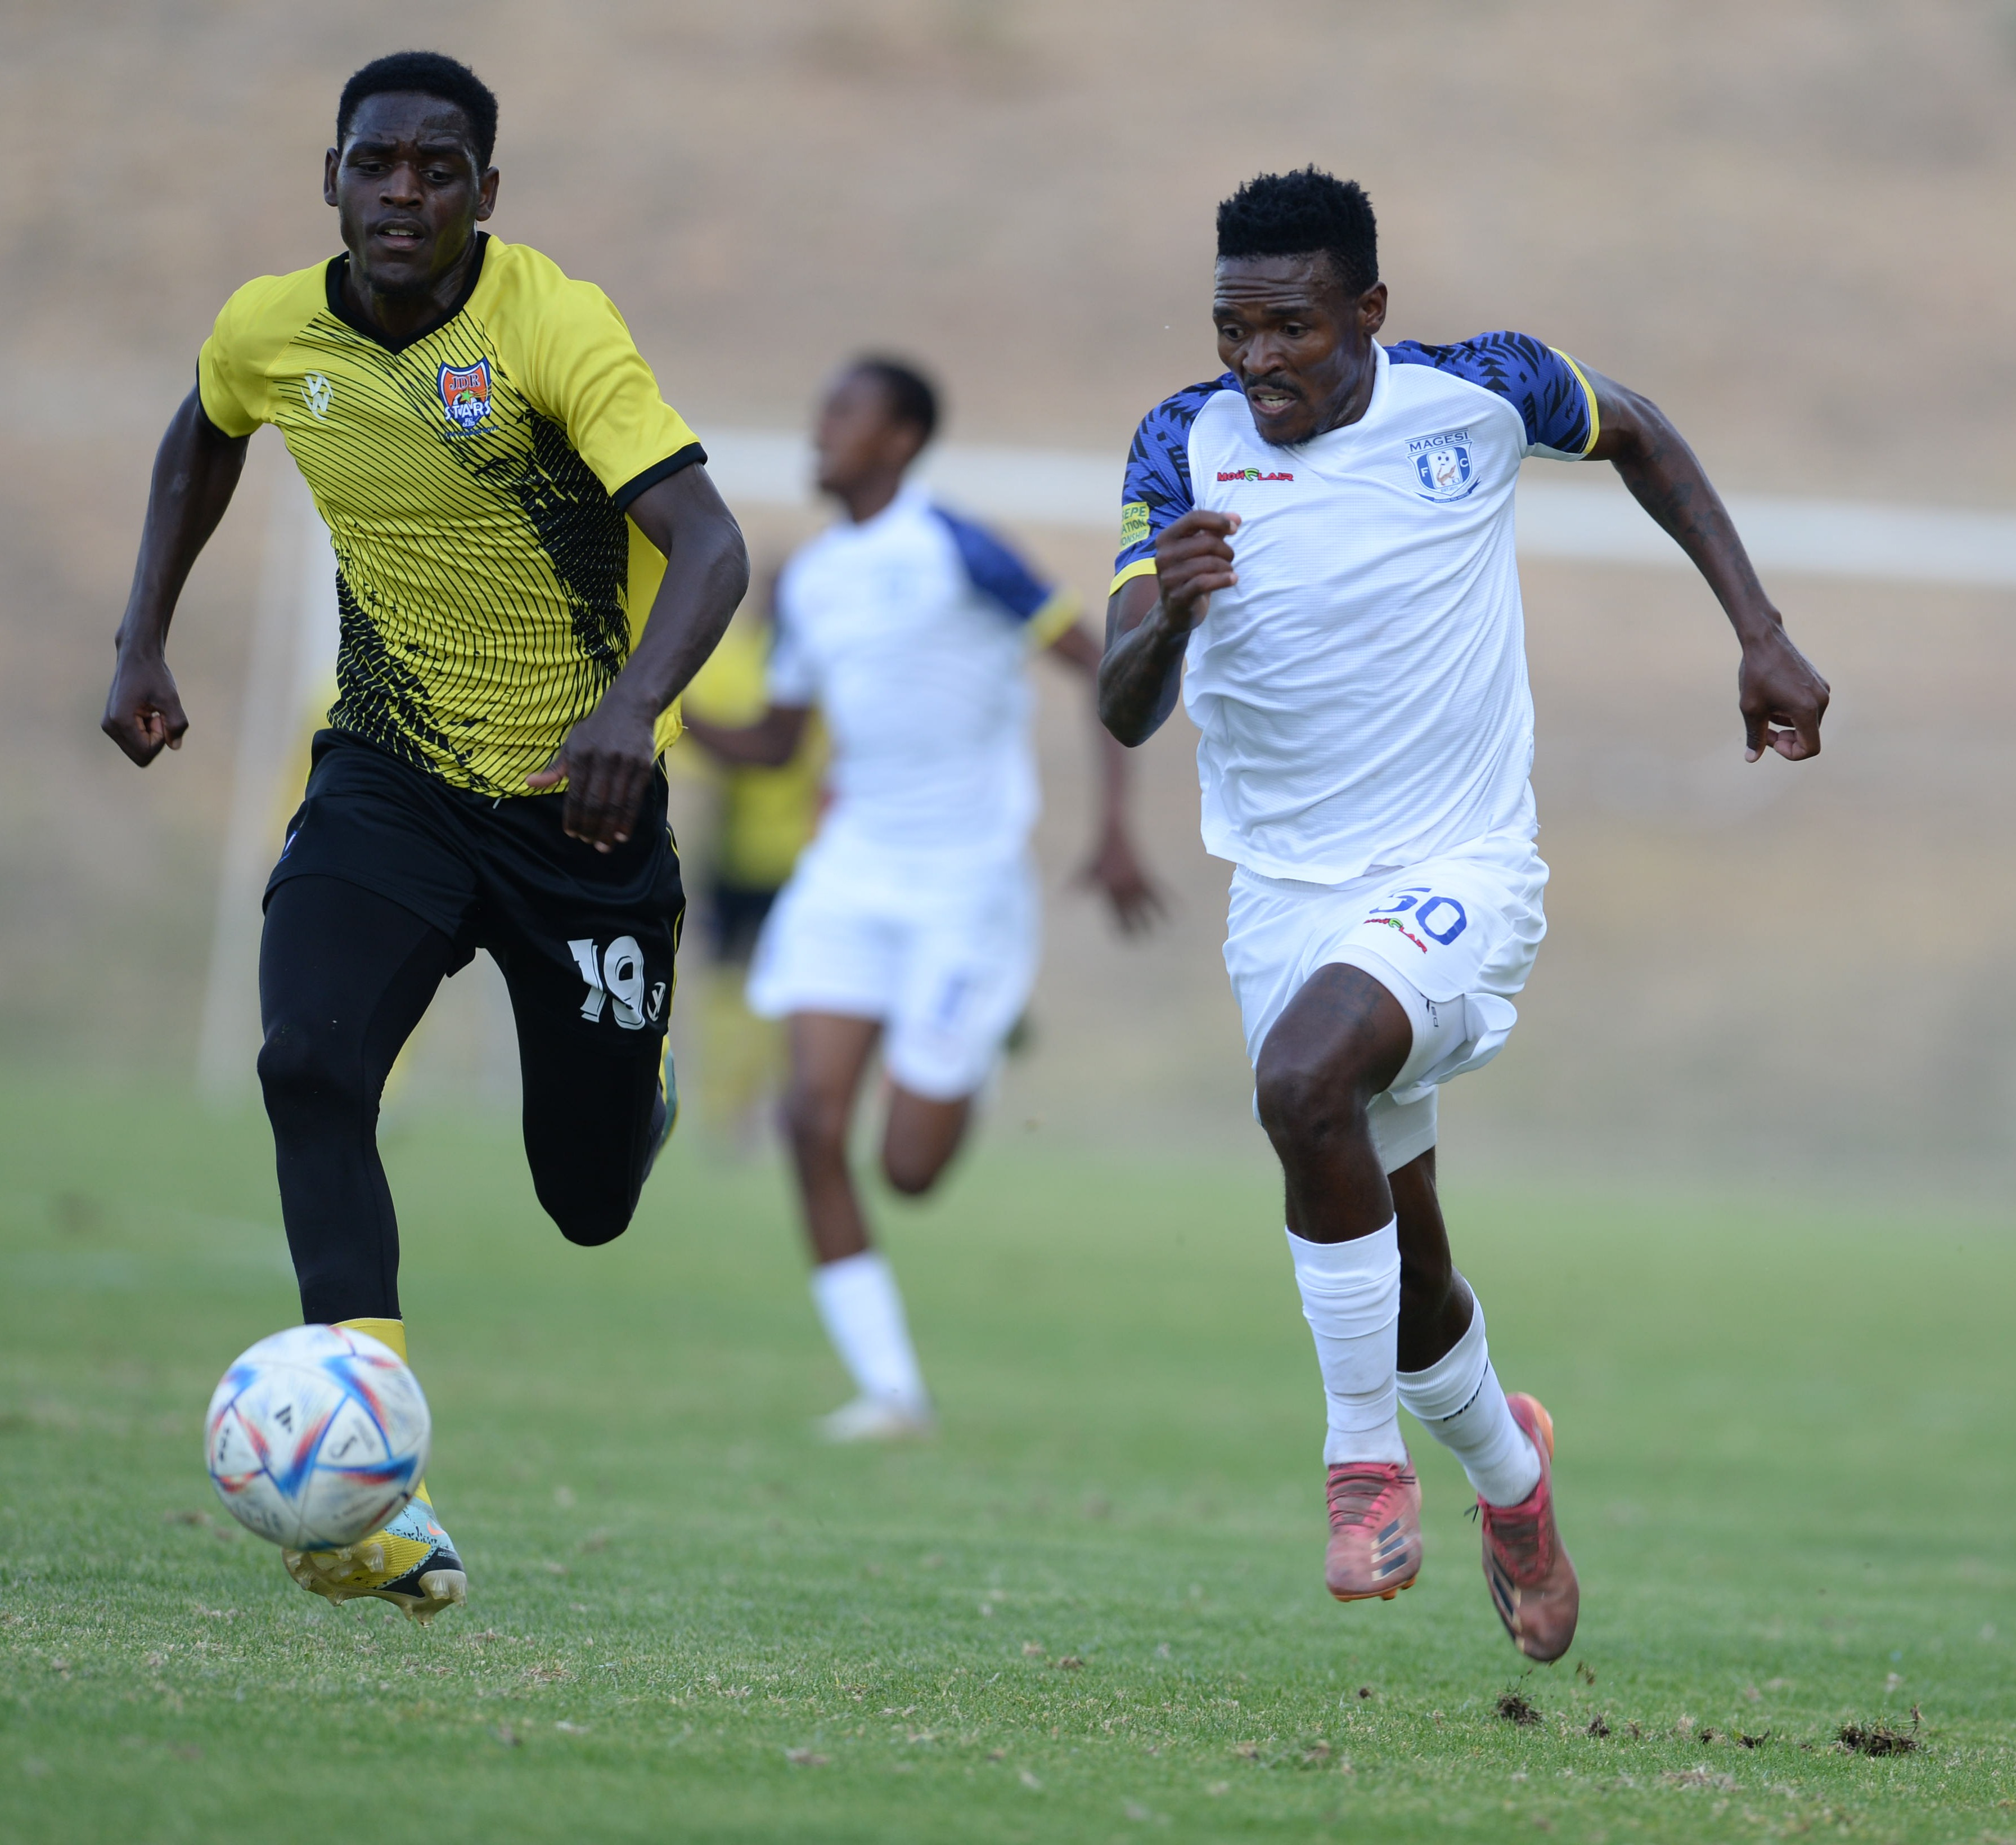 Cape Town City target JDR Stars player